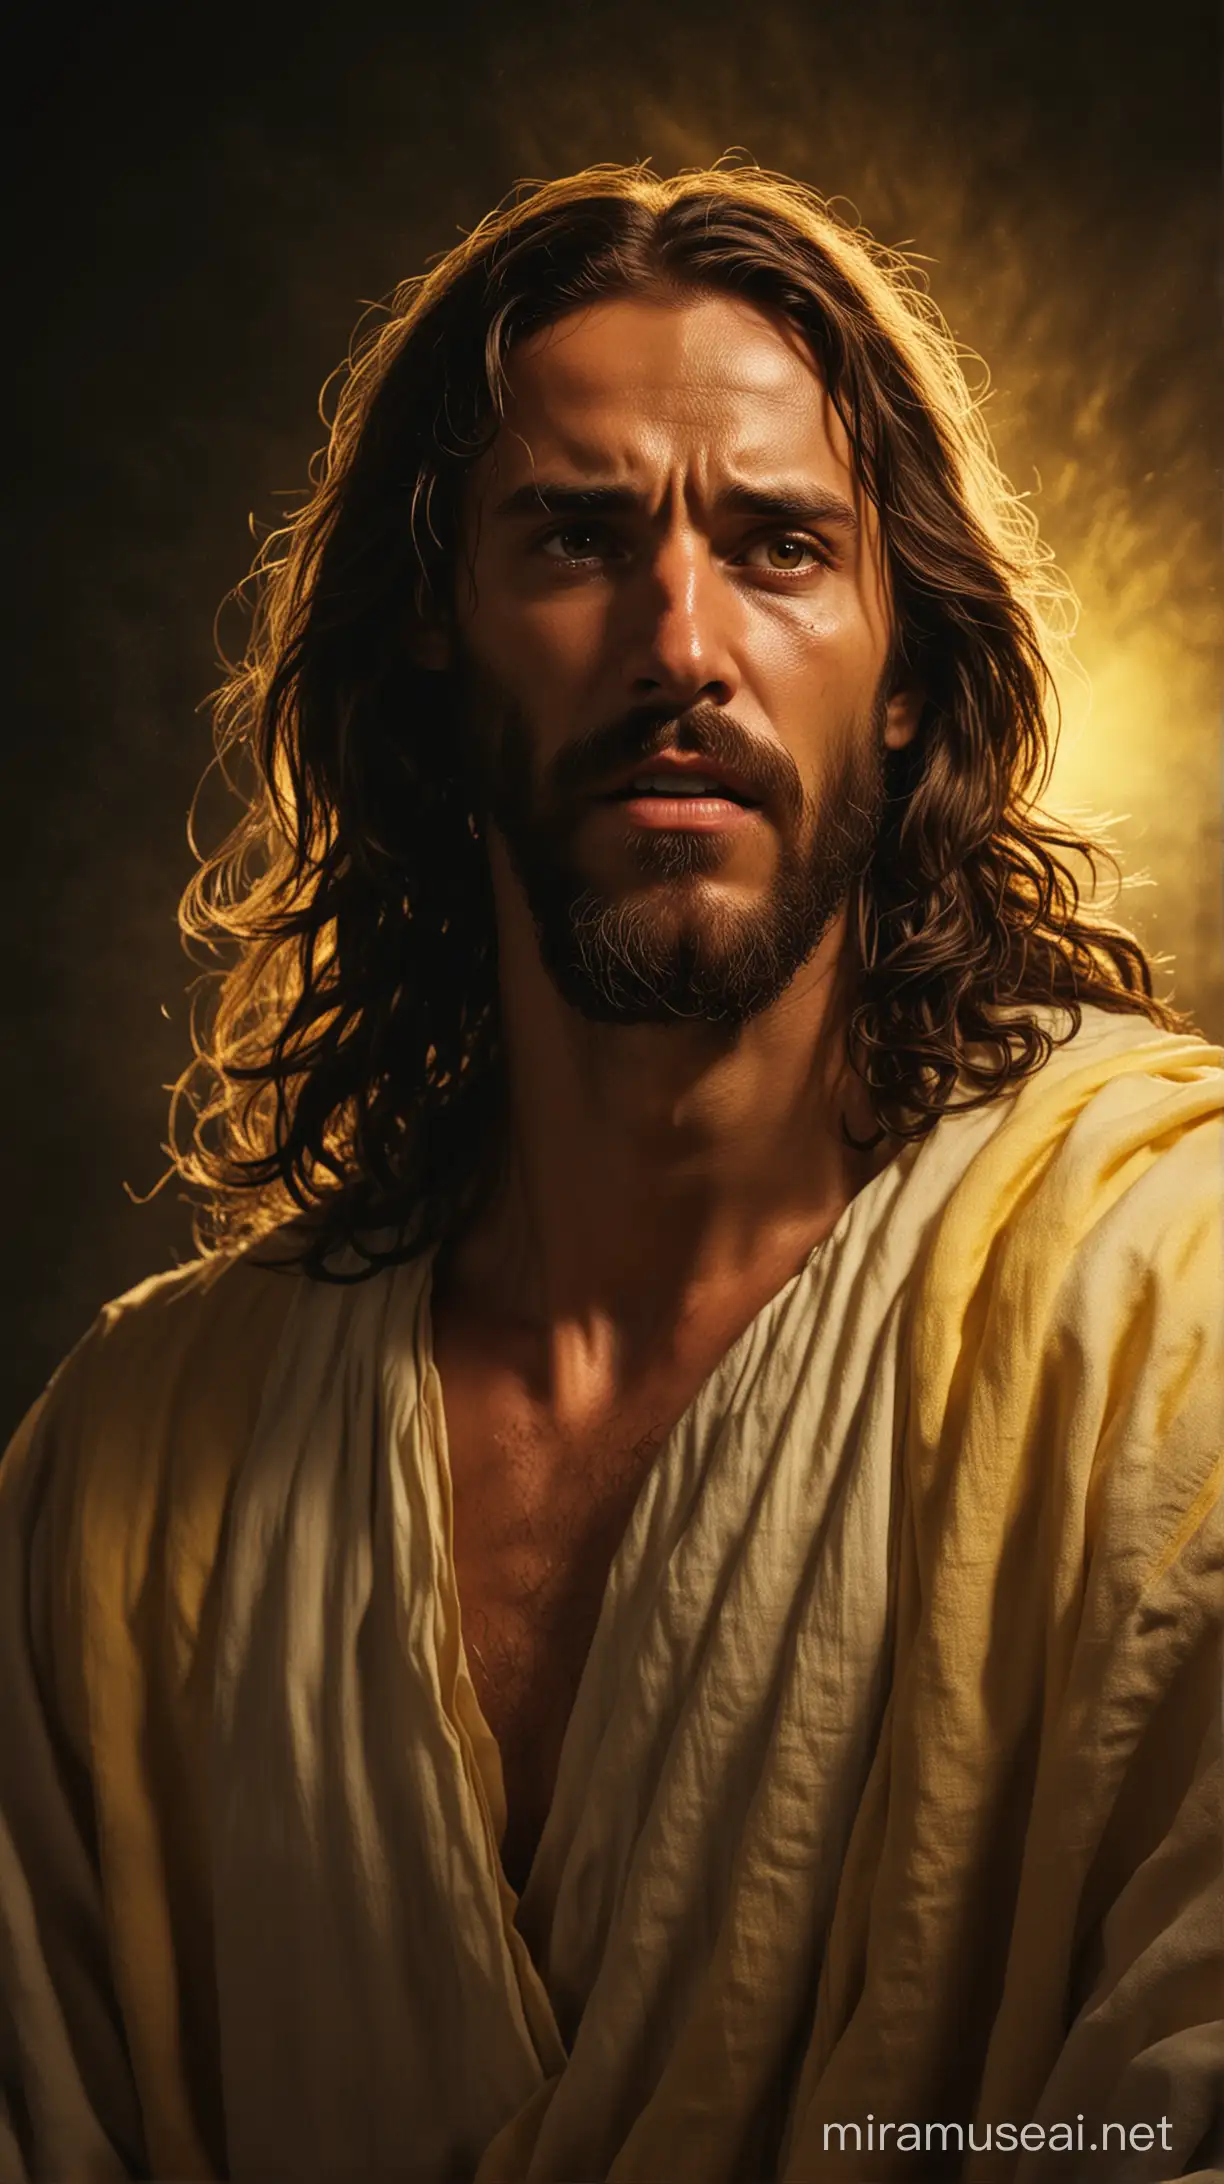 Jesus Expressing Anger Against Dark Background with Yellow Light